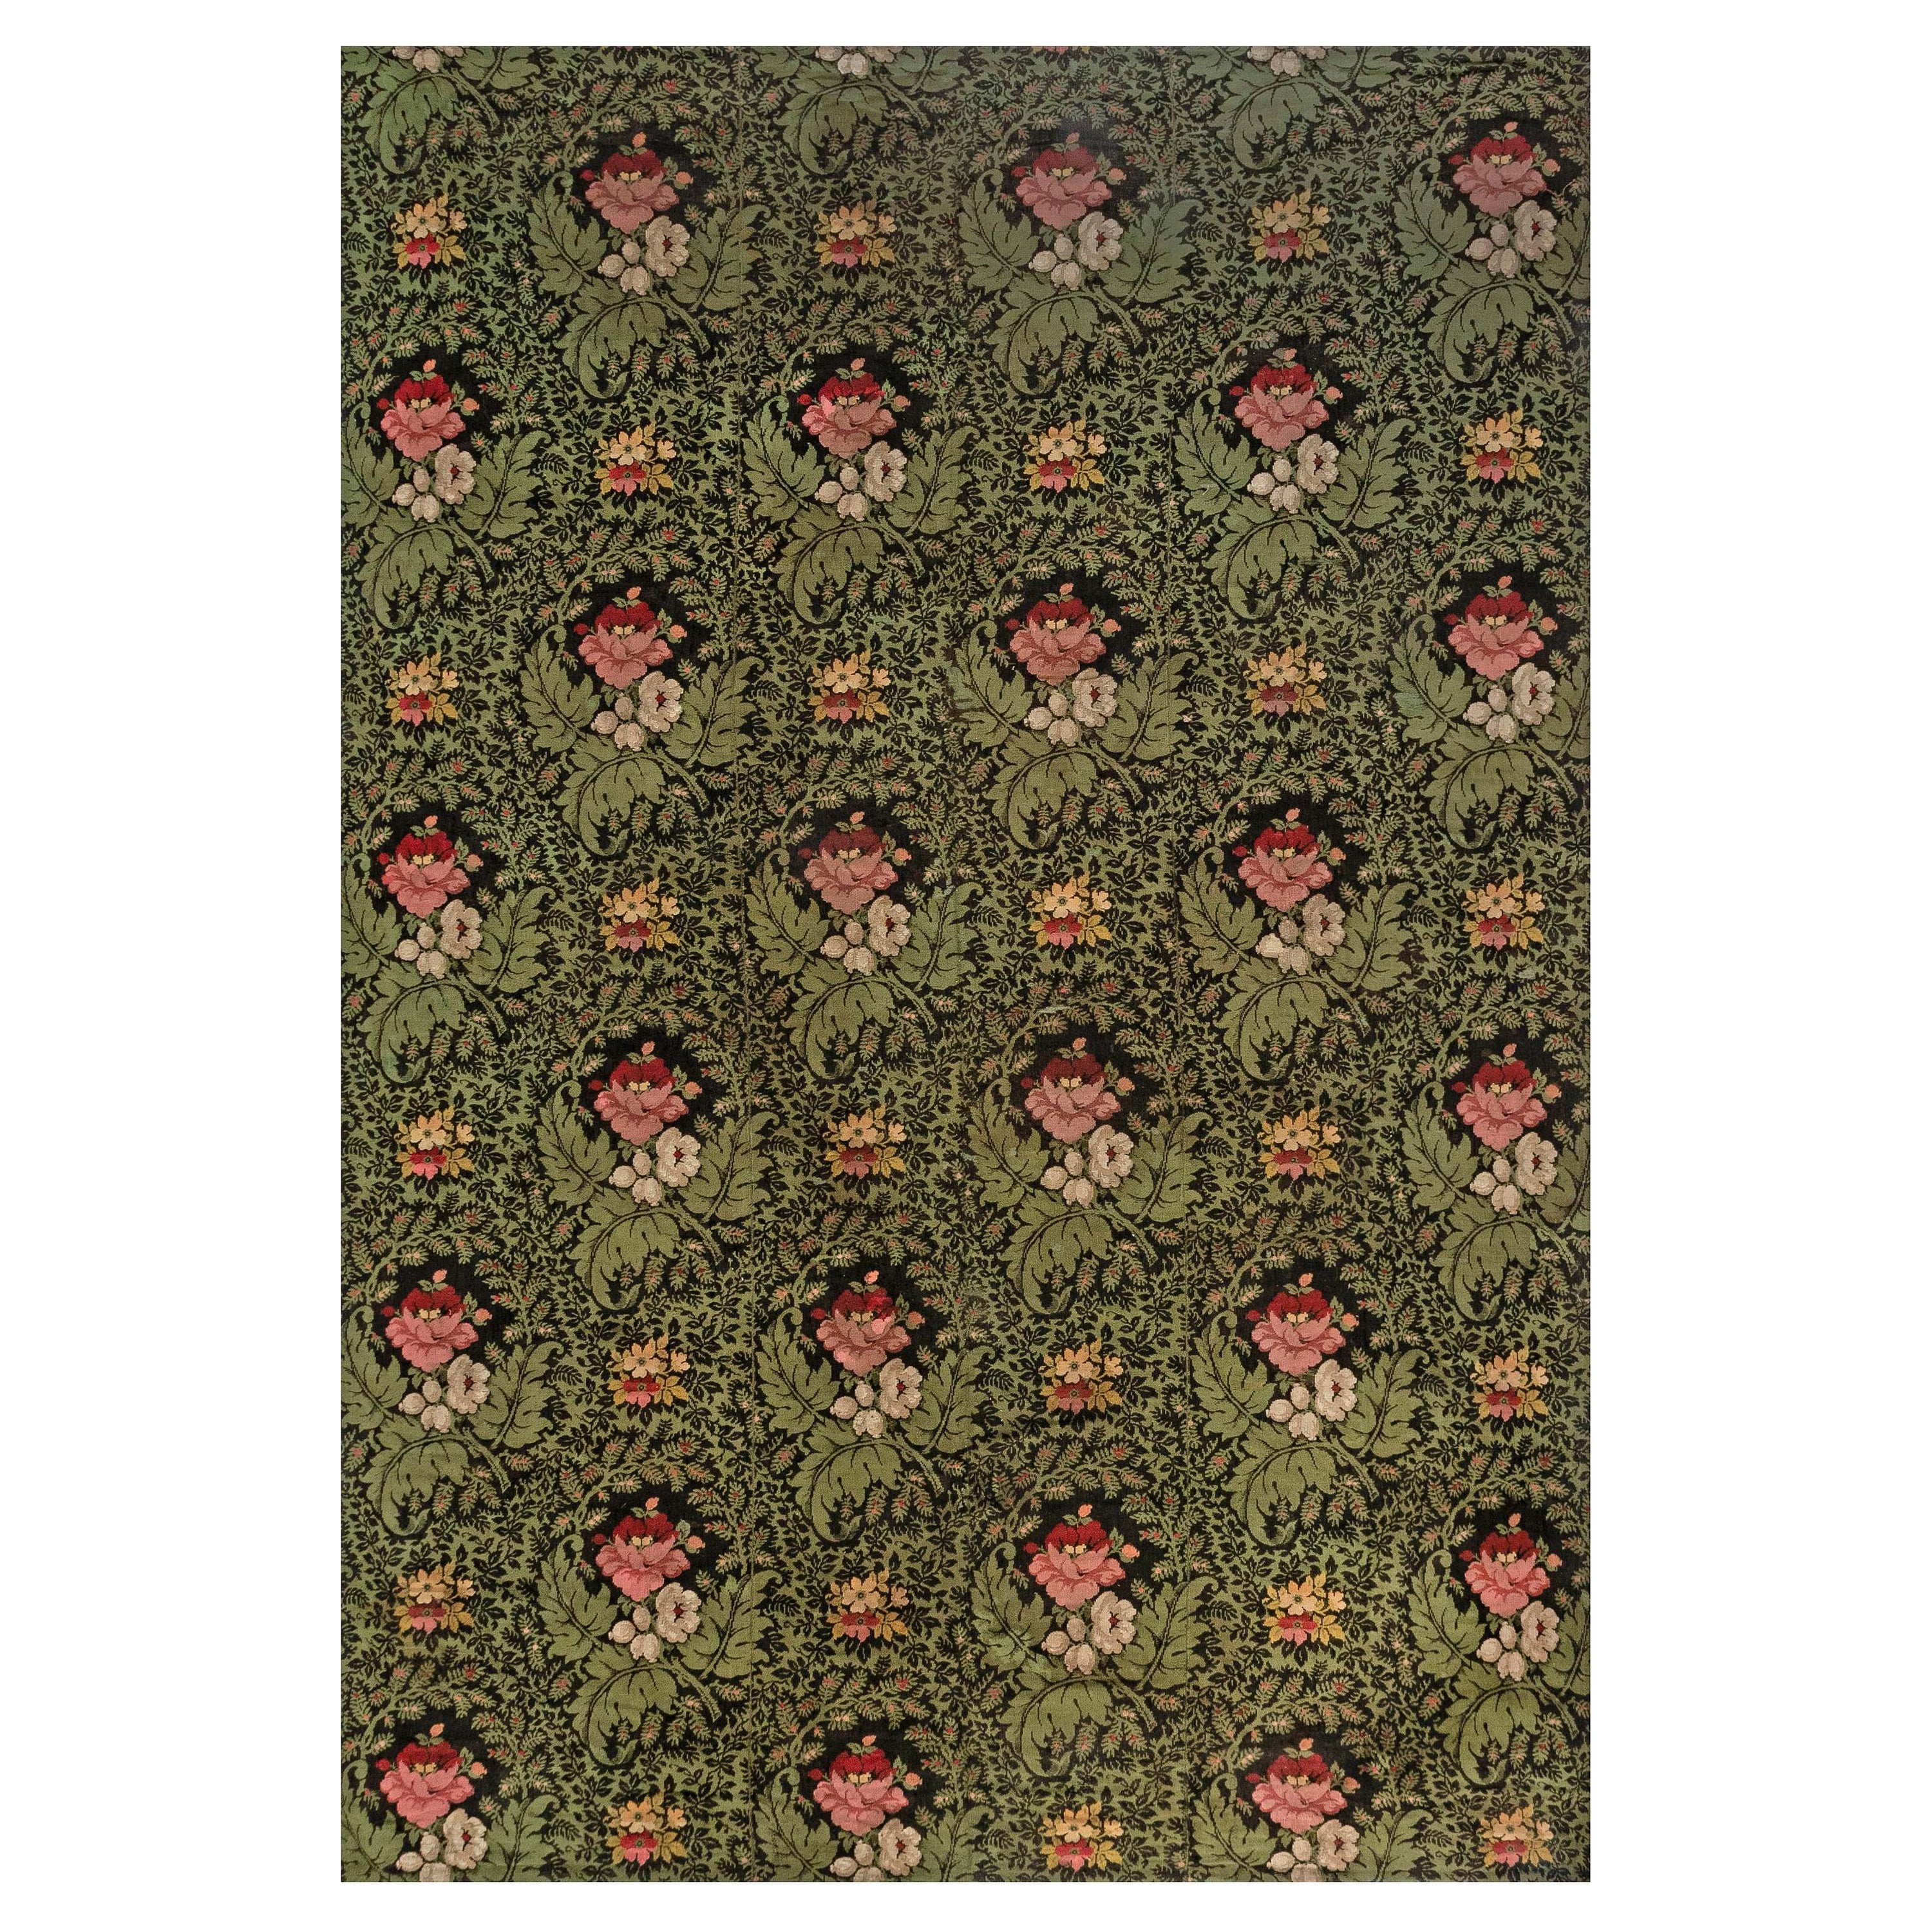 19th Century French Floral Design Green, Black and Pink Flat Weave Wool Rug